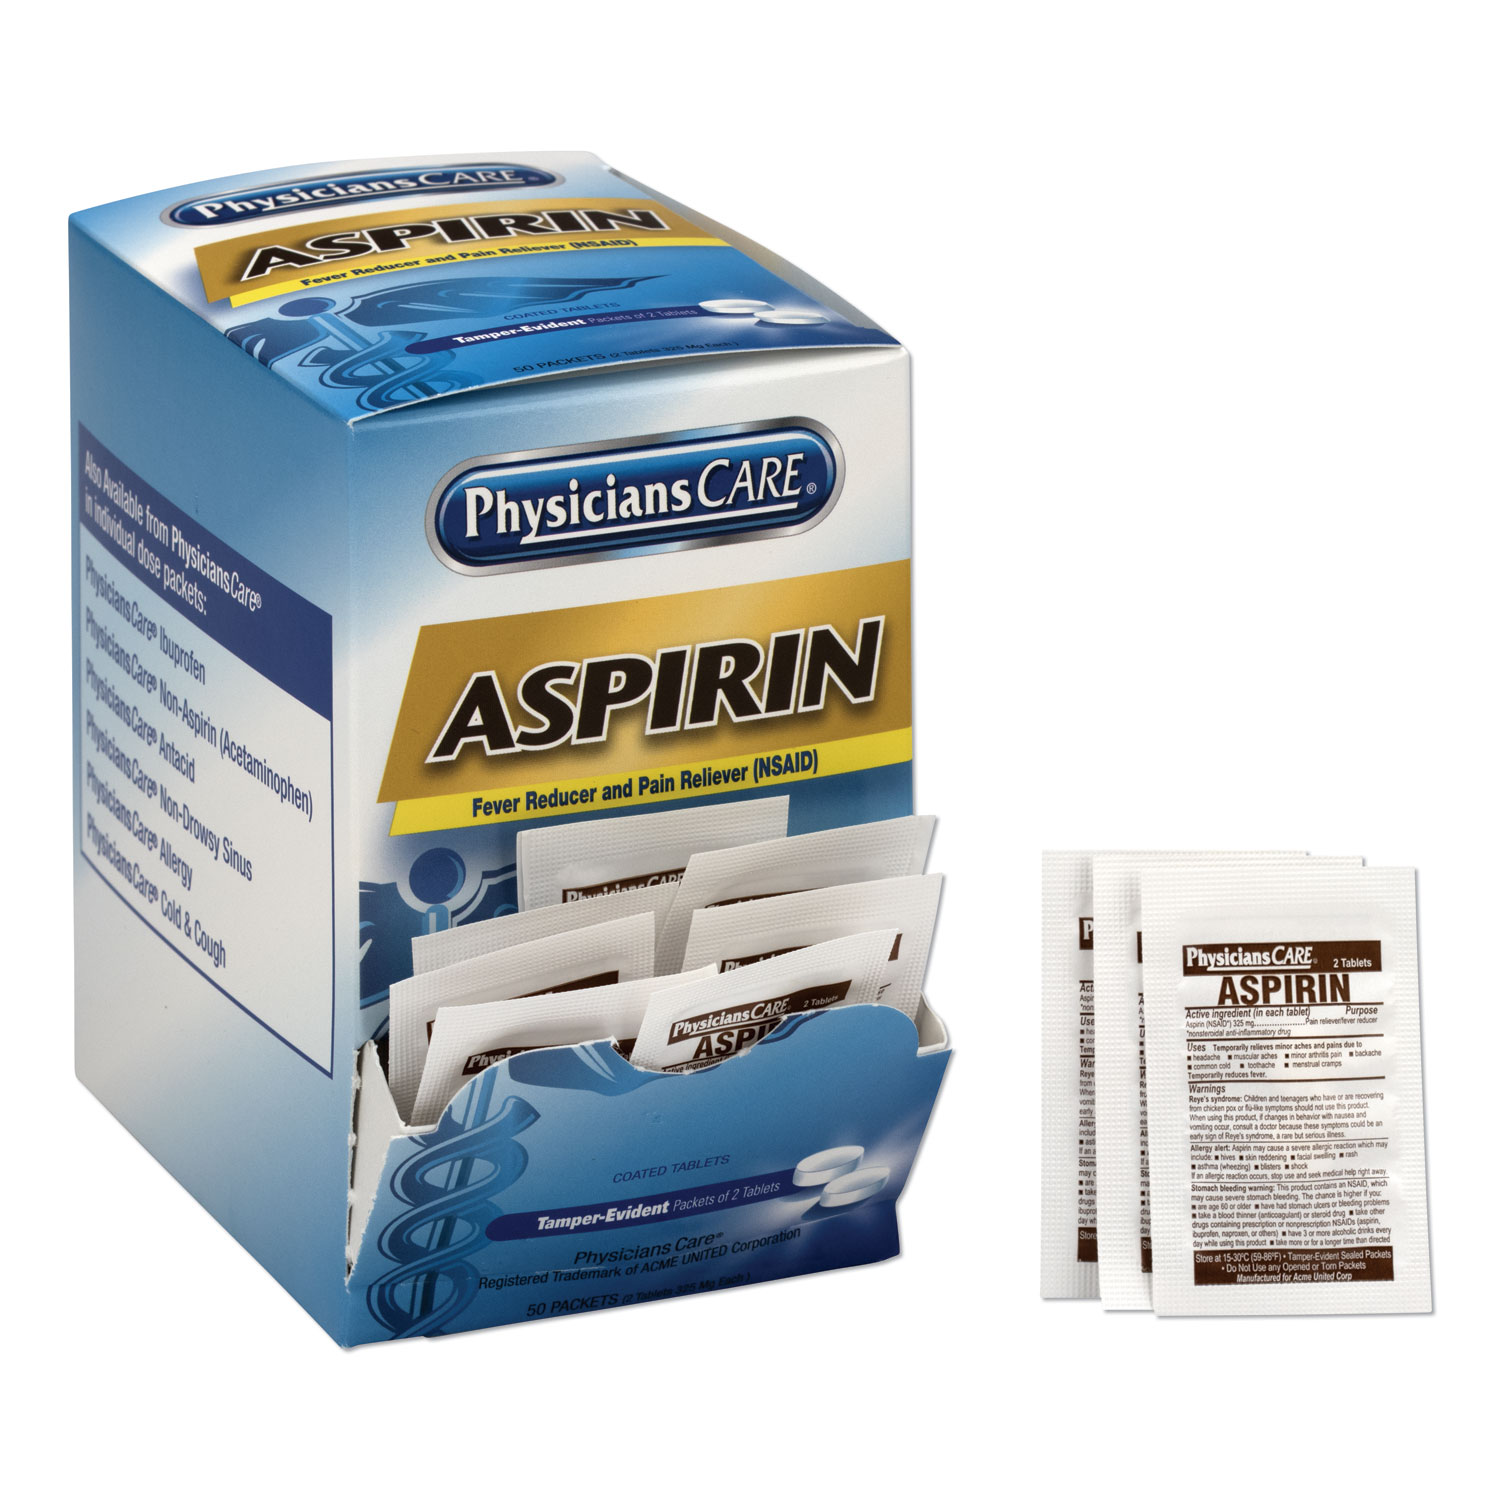  PhysiciansCare 90014-002 Aspirin Medication, Two-Pack, 50 Packs/Box (ACM90014) 